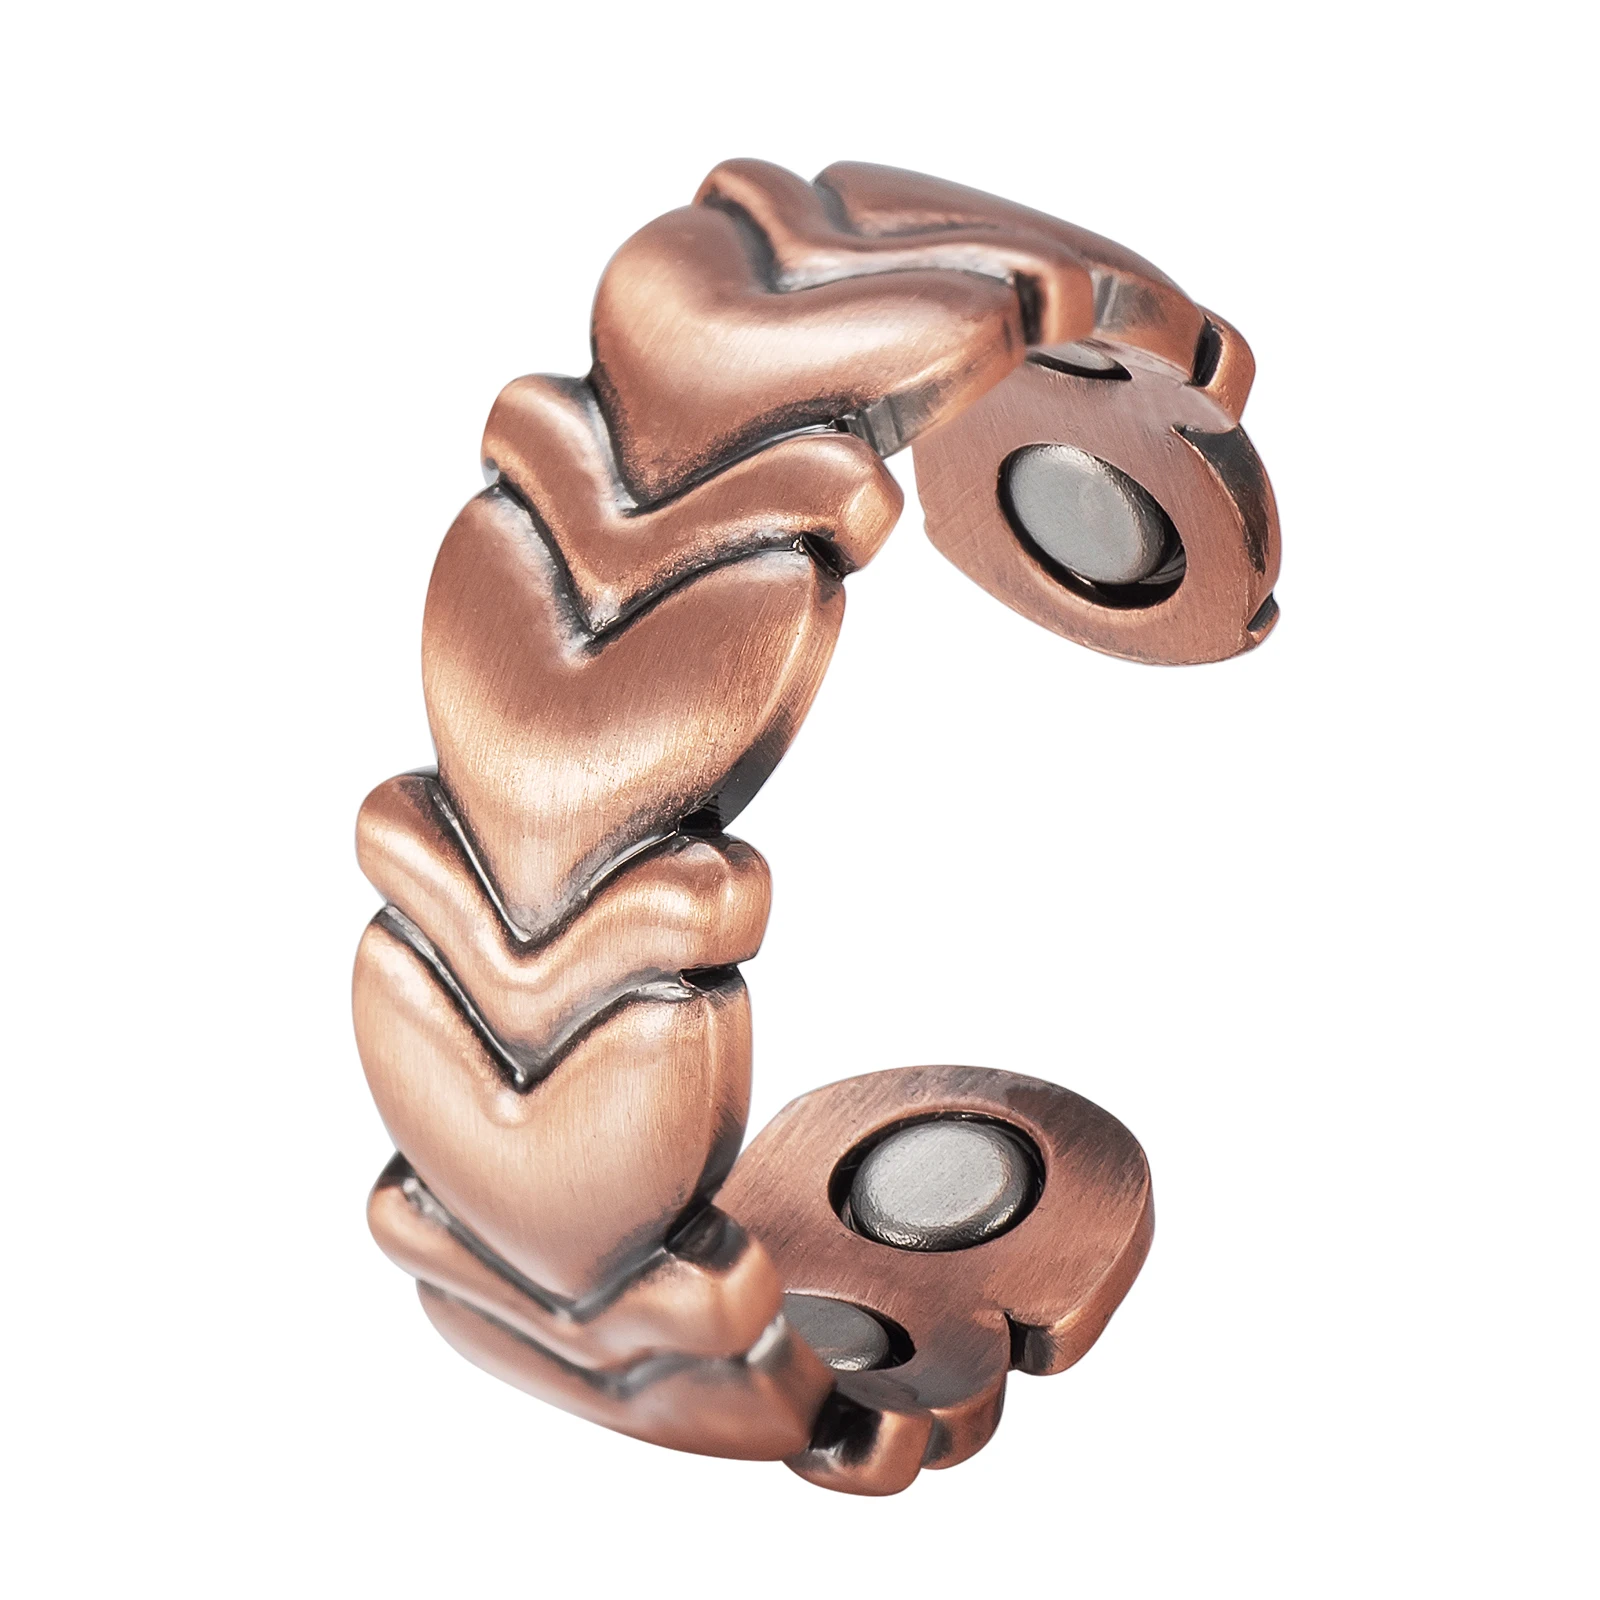 

Promote joint health, ease arthritis. Copper magnetic ladies' ring: an elegant, caring gift radiating grace.